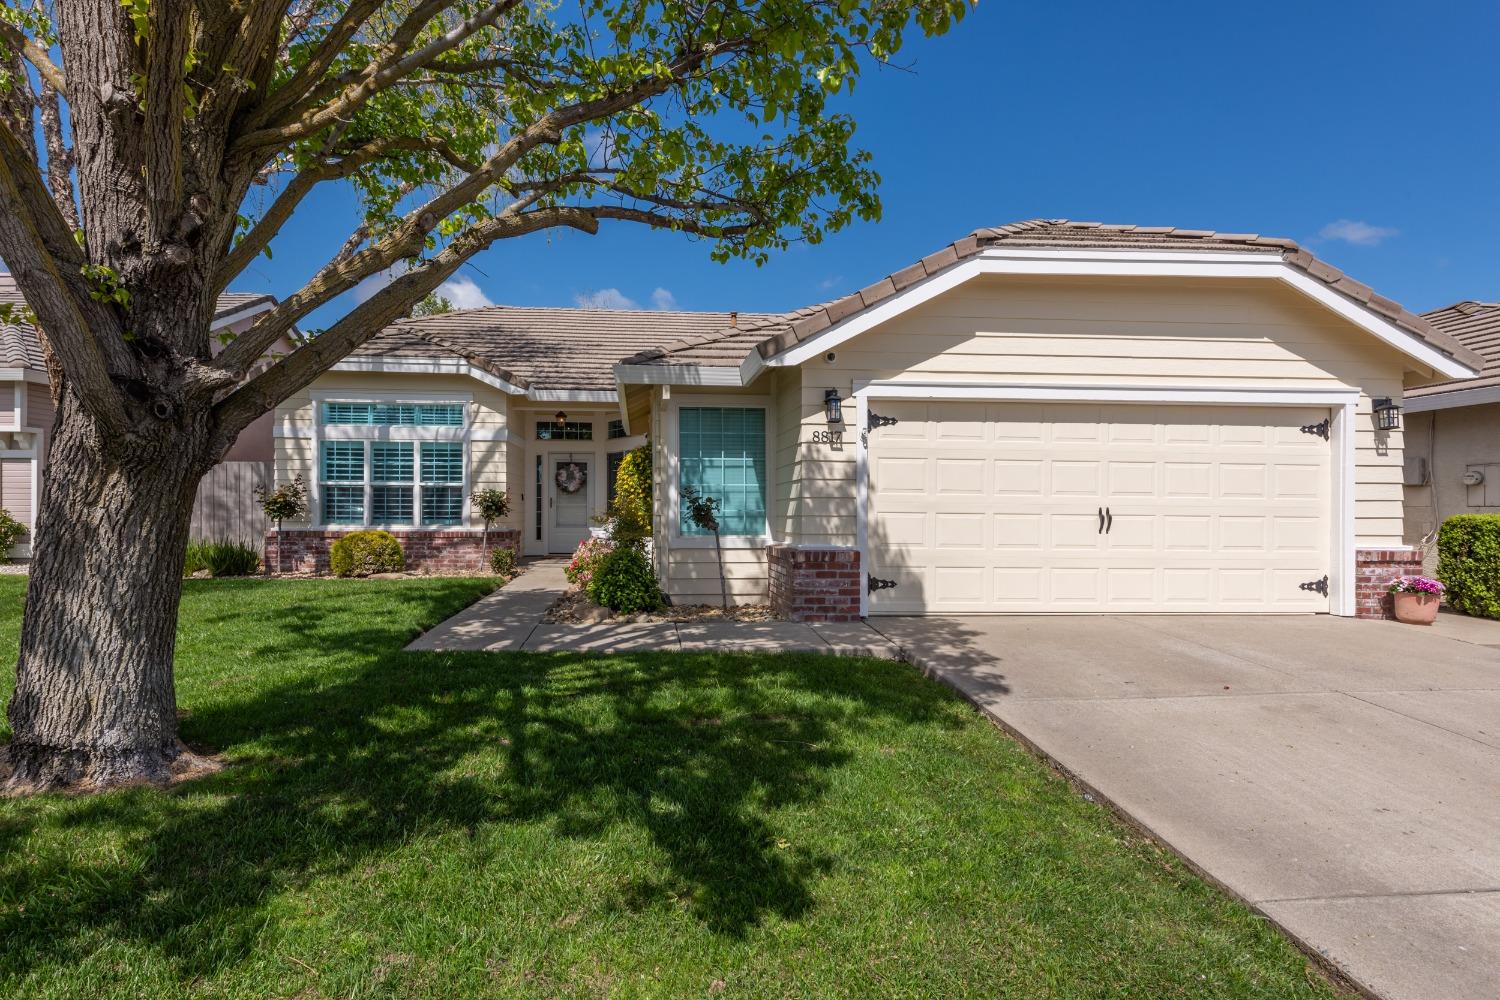 This Immaculate 3 bedroom 2 full bath home is located in the heart of Elk Grove.  Features include: 